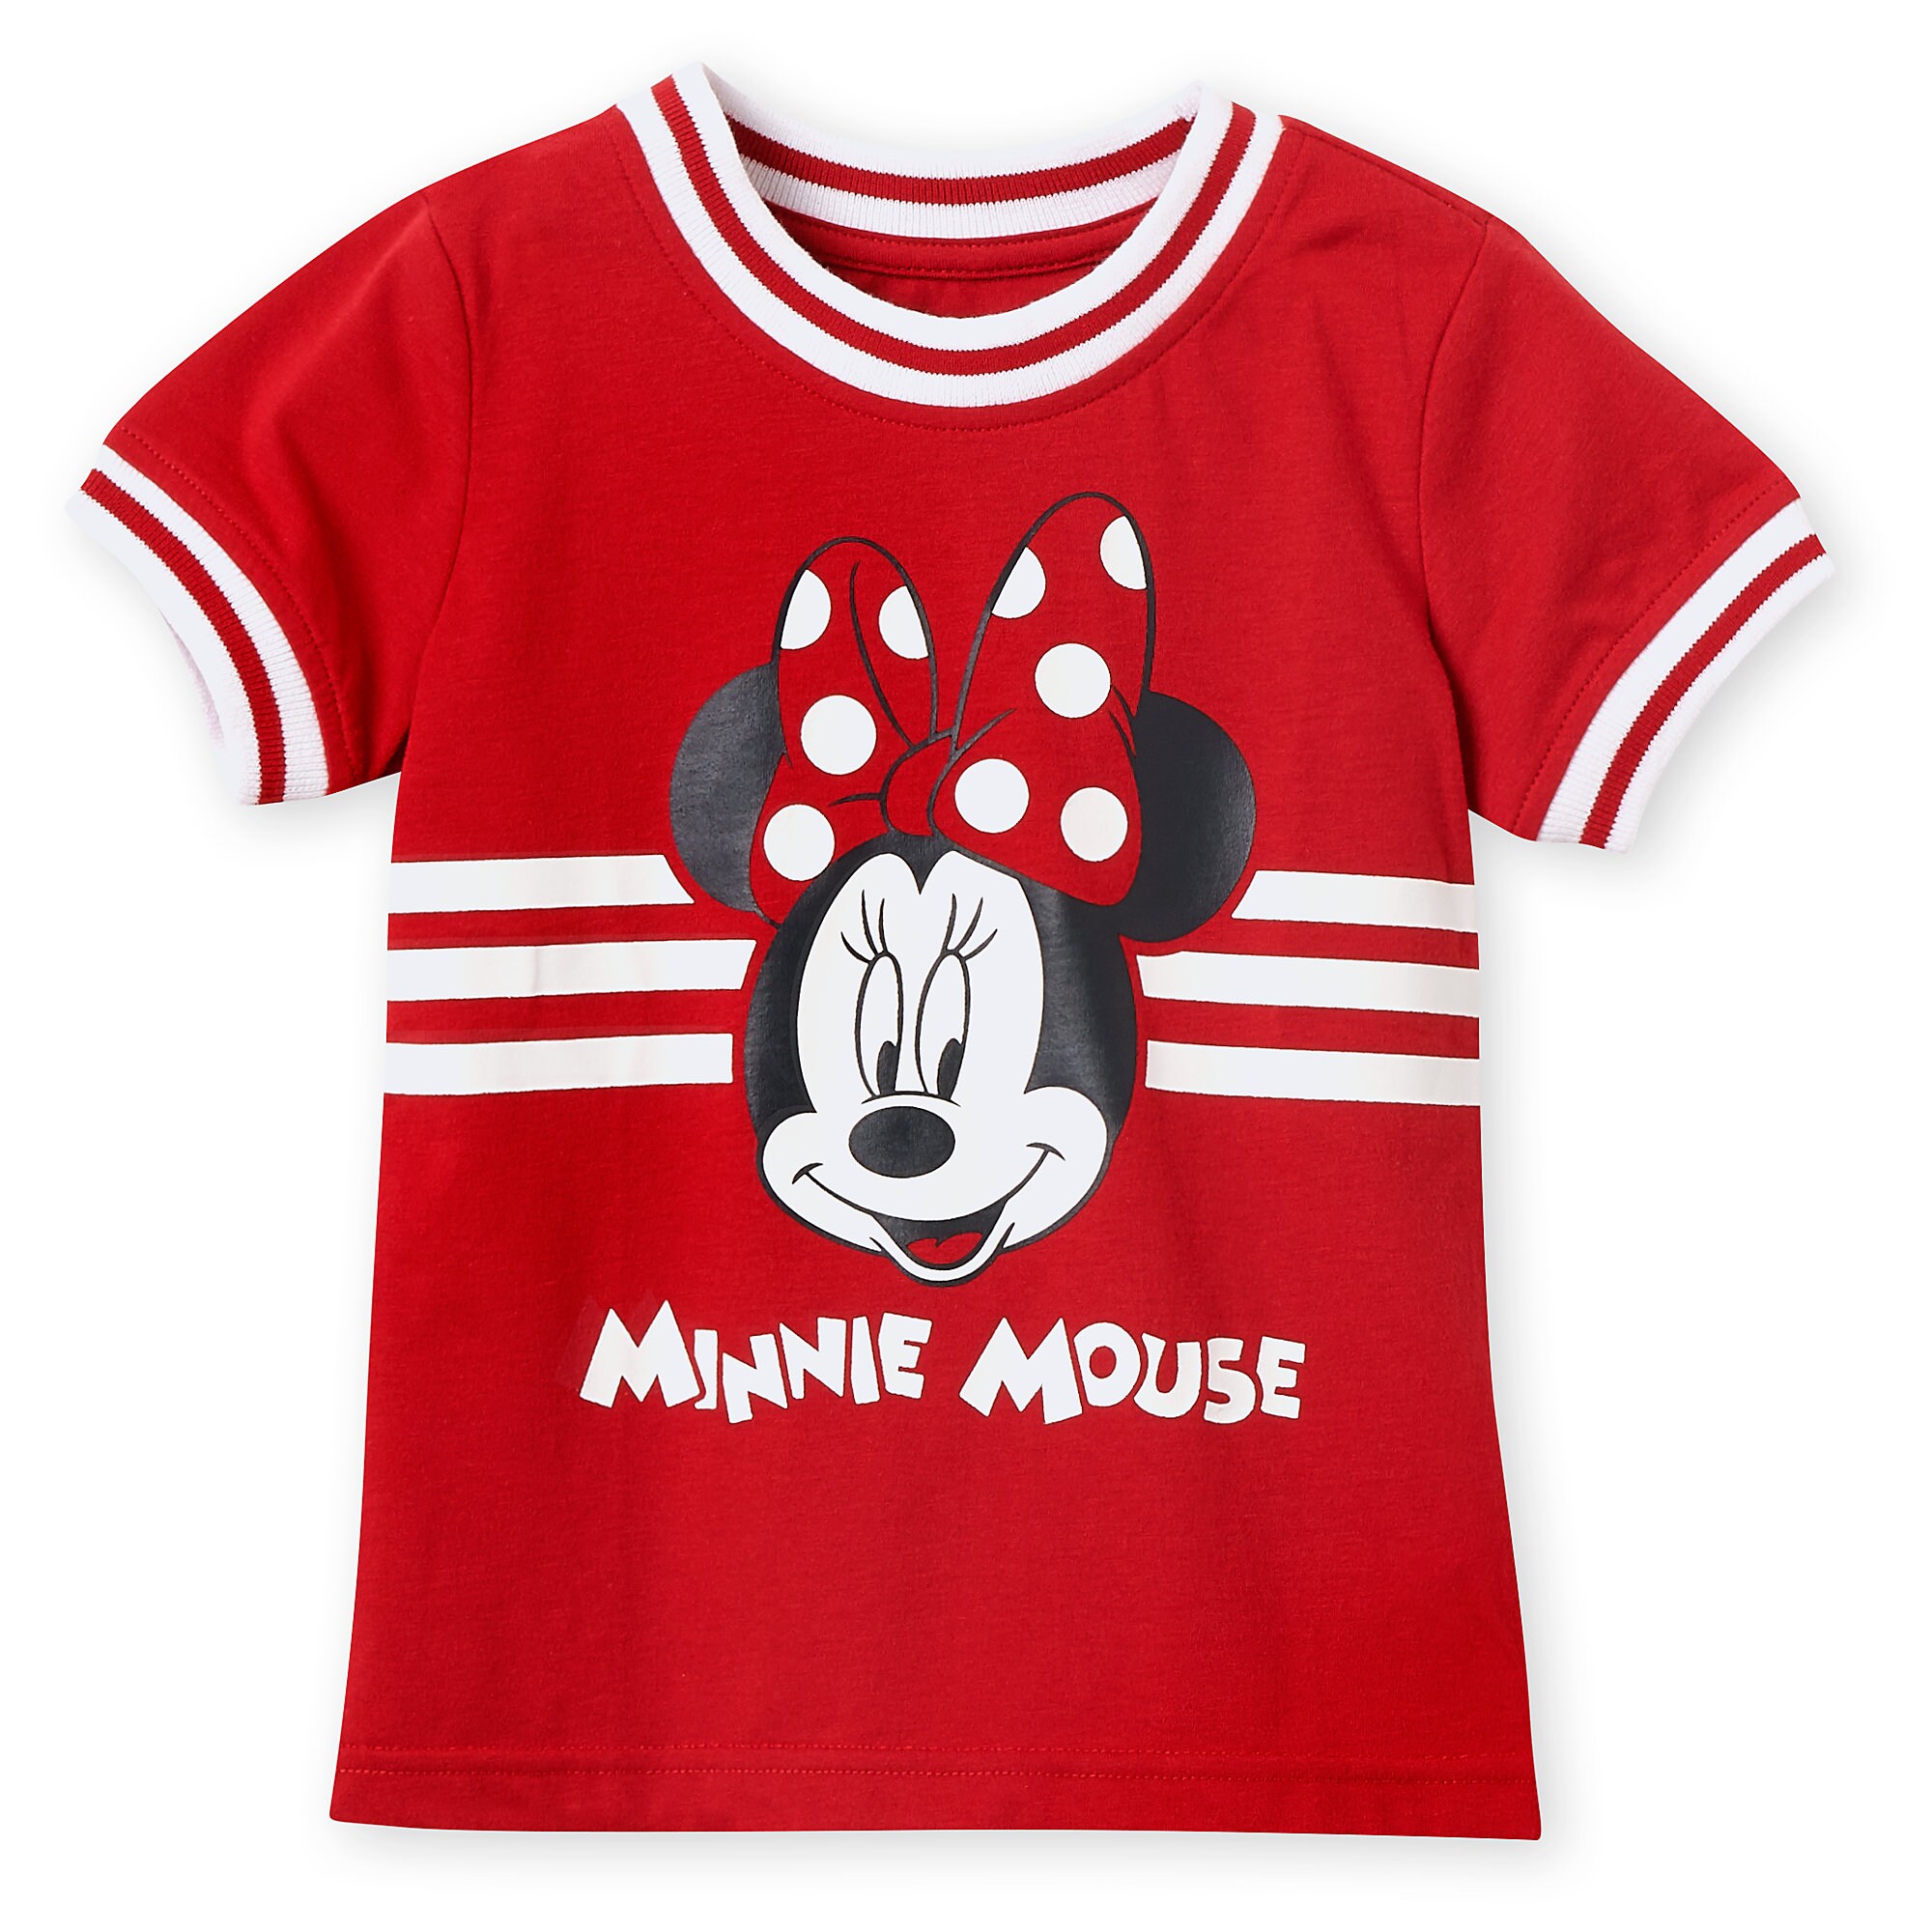 Minnie Mouse Red Ringer T-Shirt for Girls